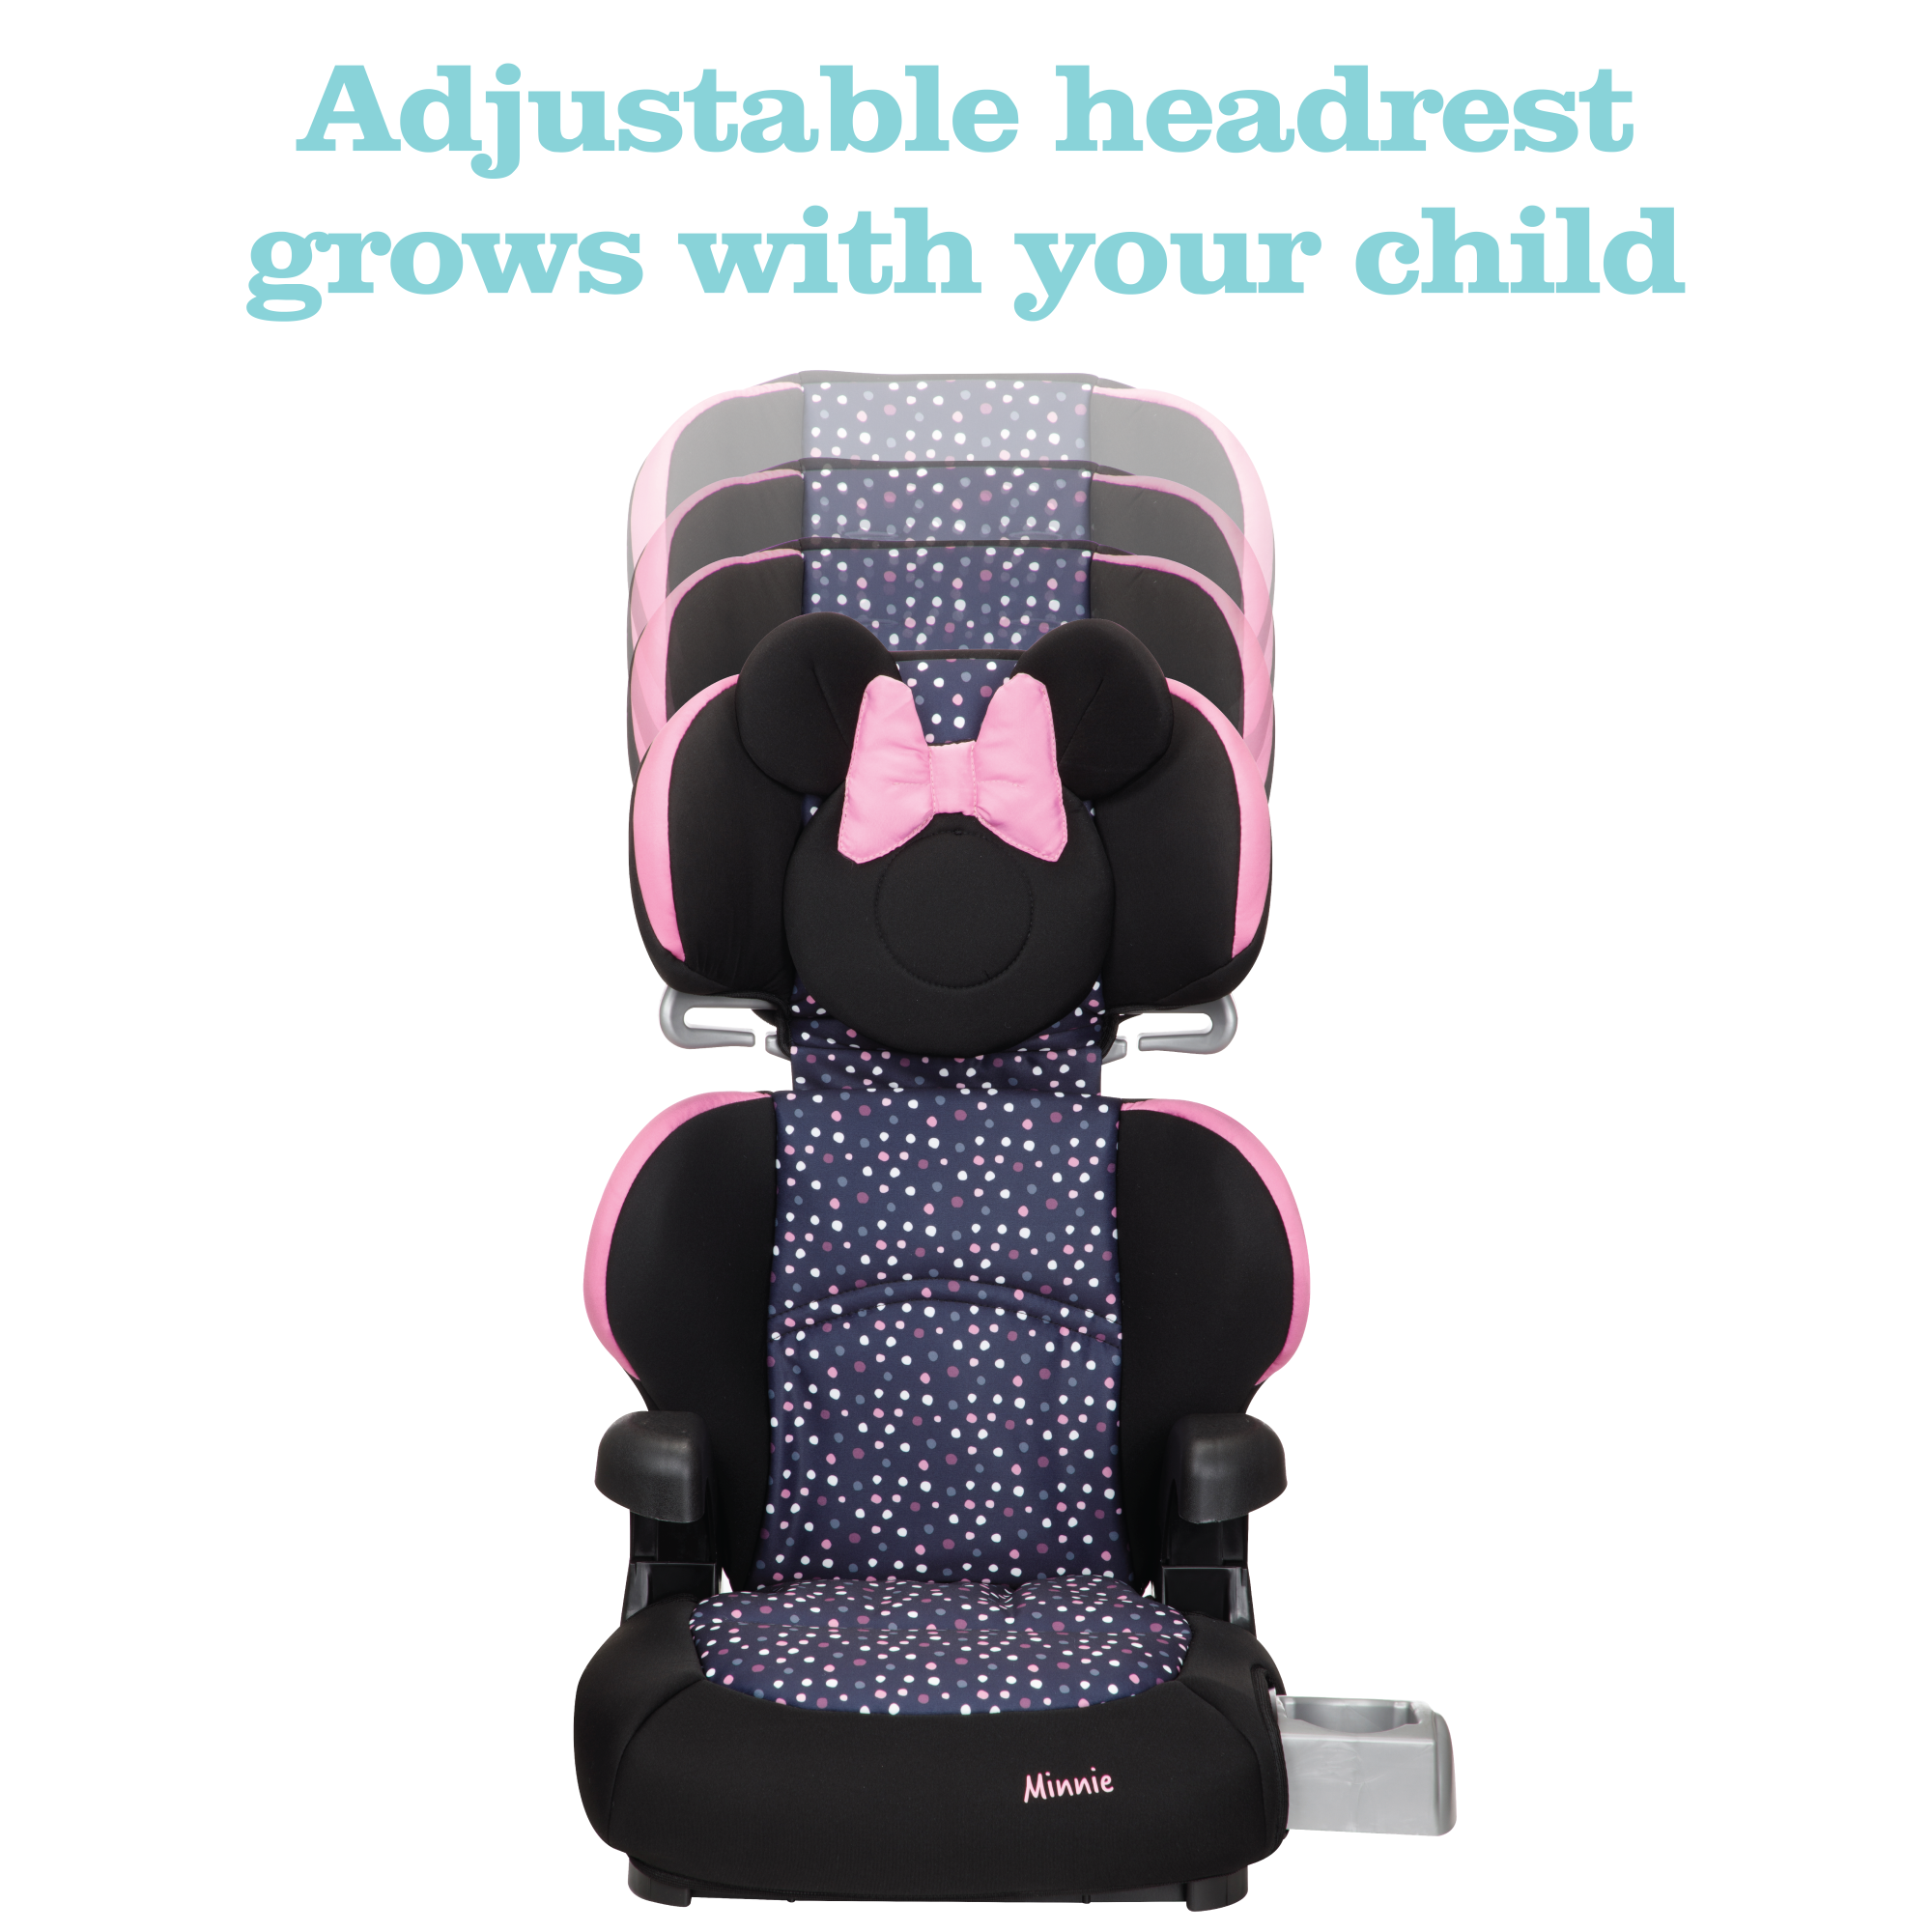 Disney Baby Pronto!™ Belt-Positioning Booster Car Seat - Minnie Dot Party - adjustable headrest grows with your child